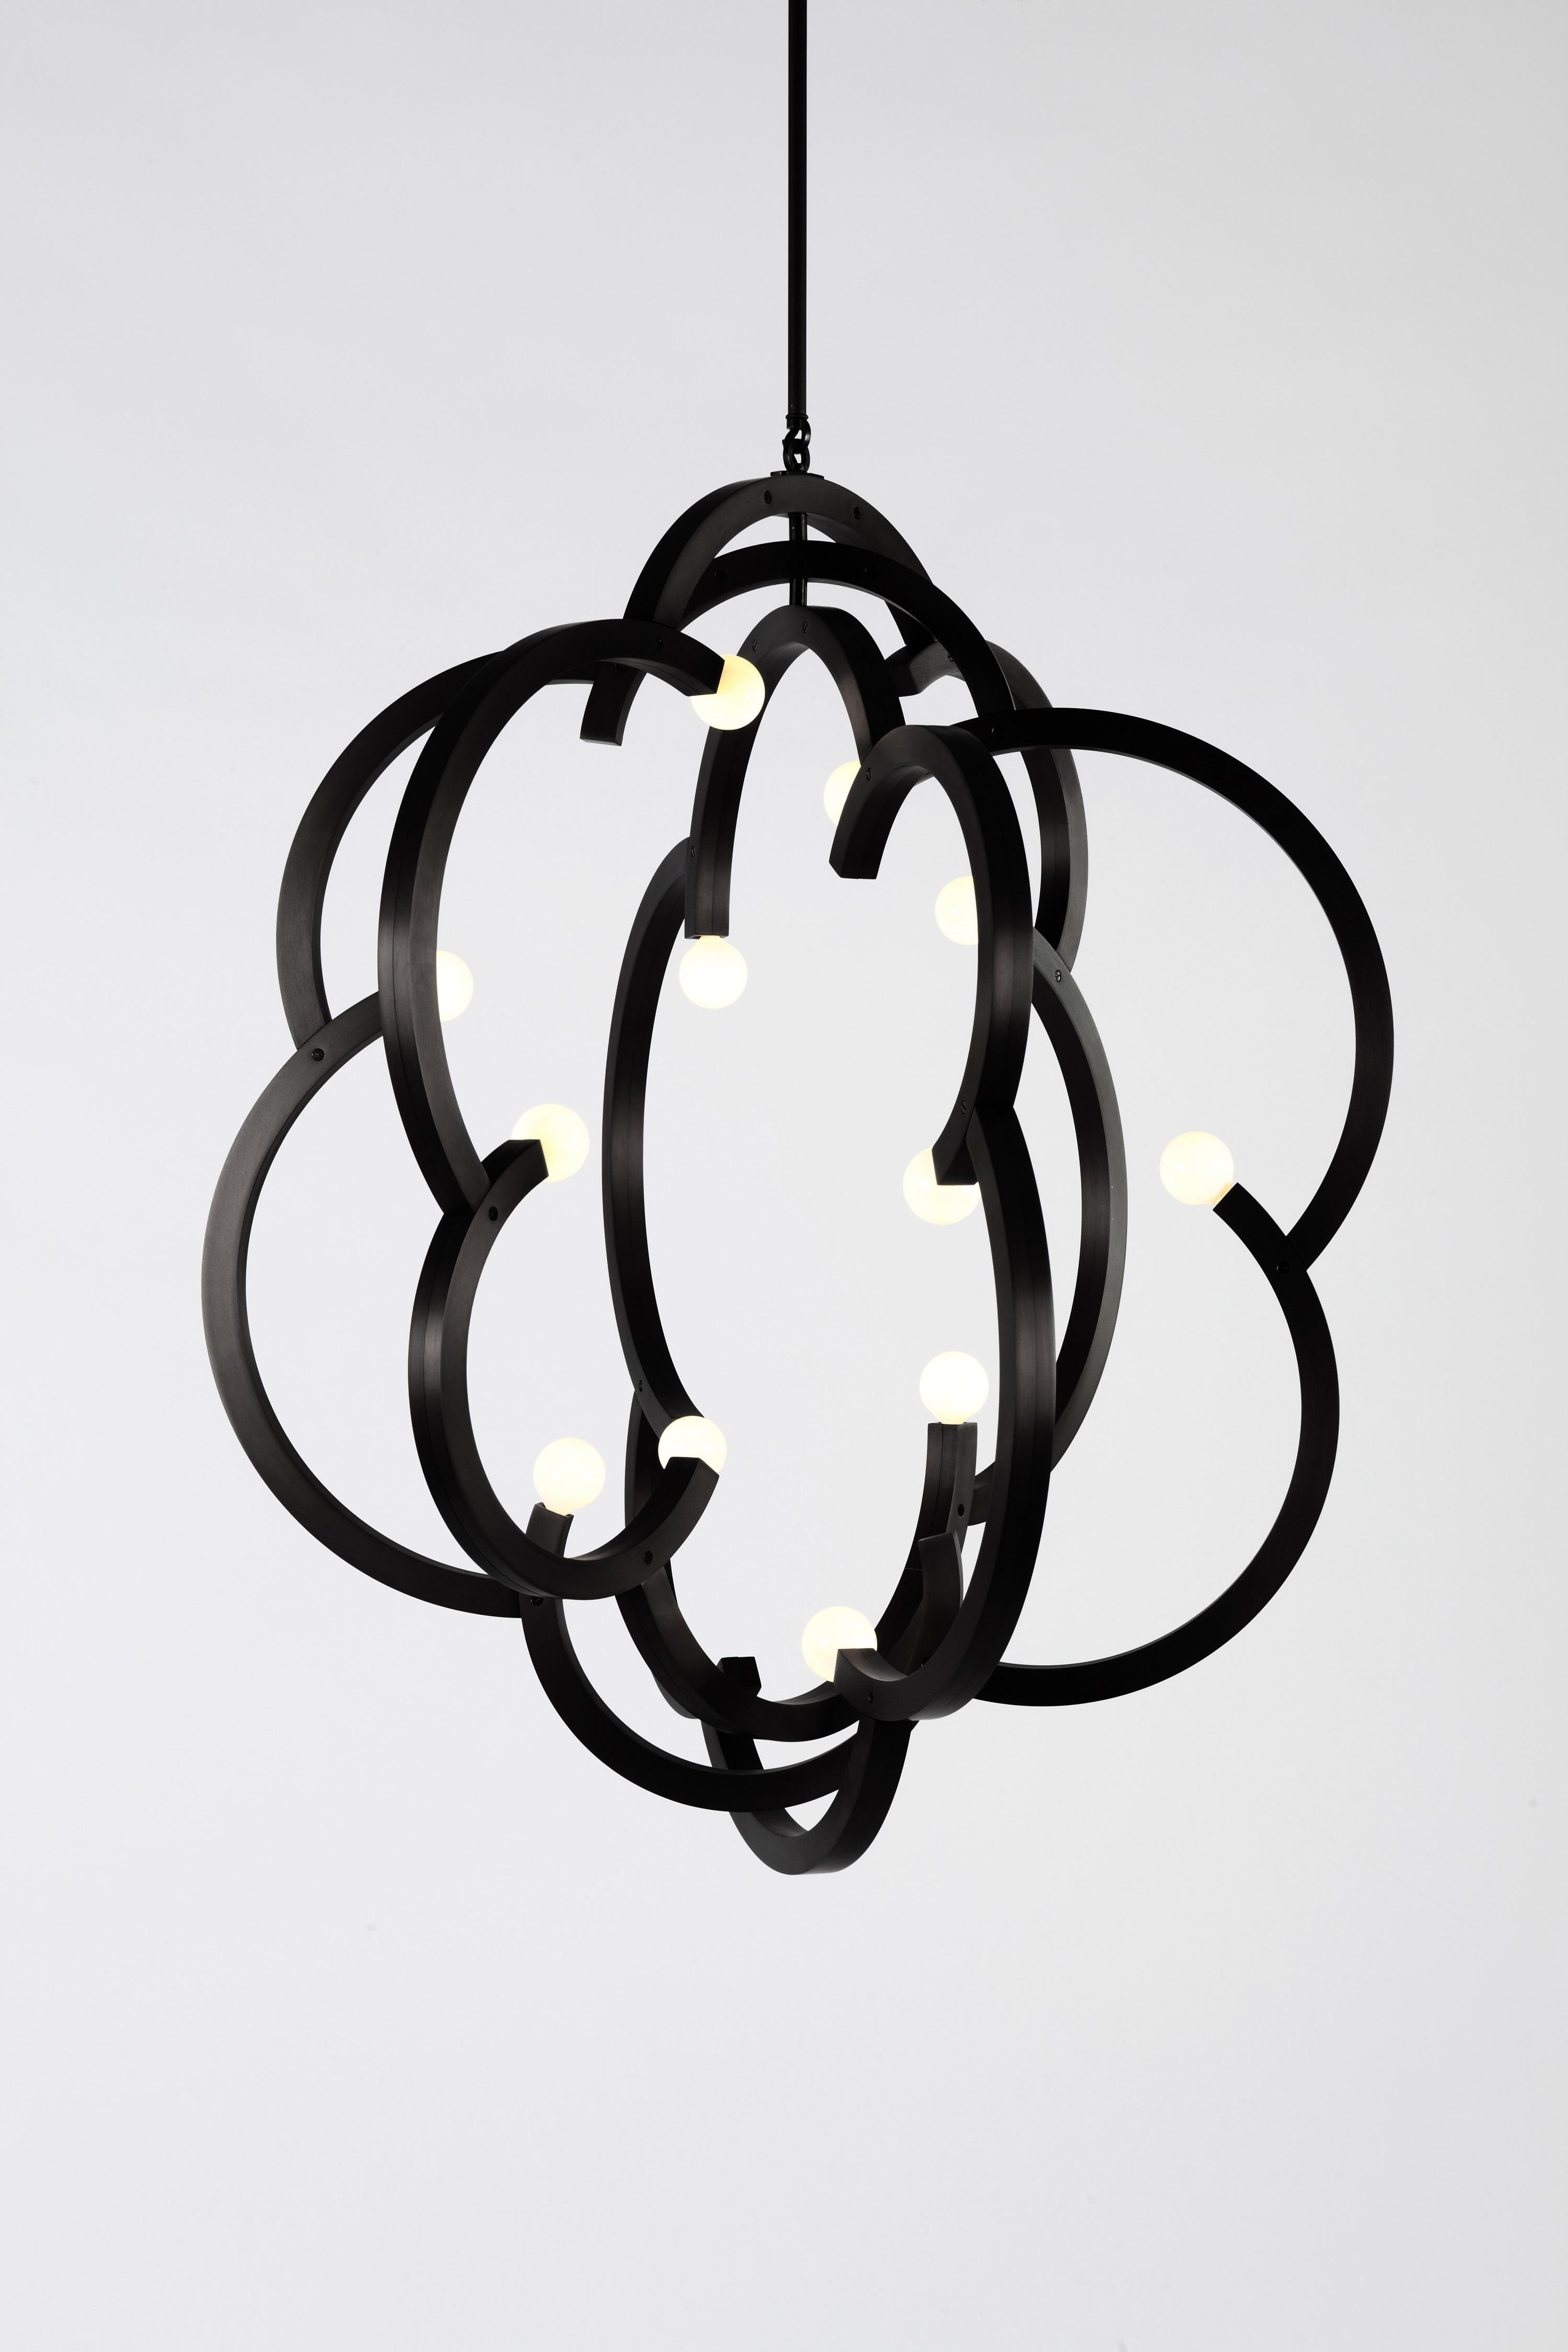 Blow is inspired by traditional French wine barrel candelabras, where the wooden staves are typically inverted and mounted to the metal hoops. These staves are playfully scaled and oriented to create an asymmetrical metal cloud-like form